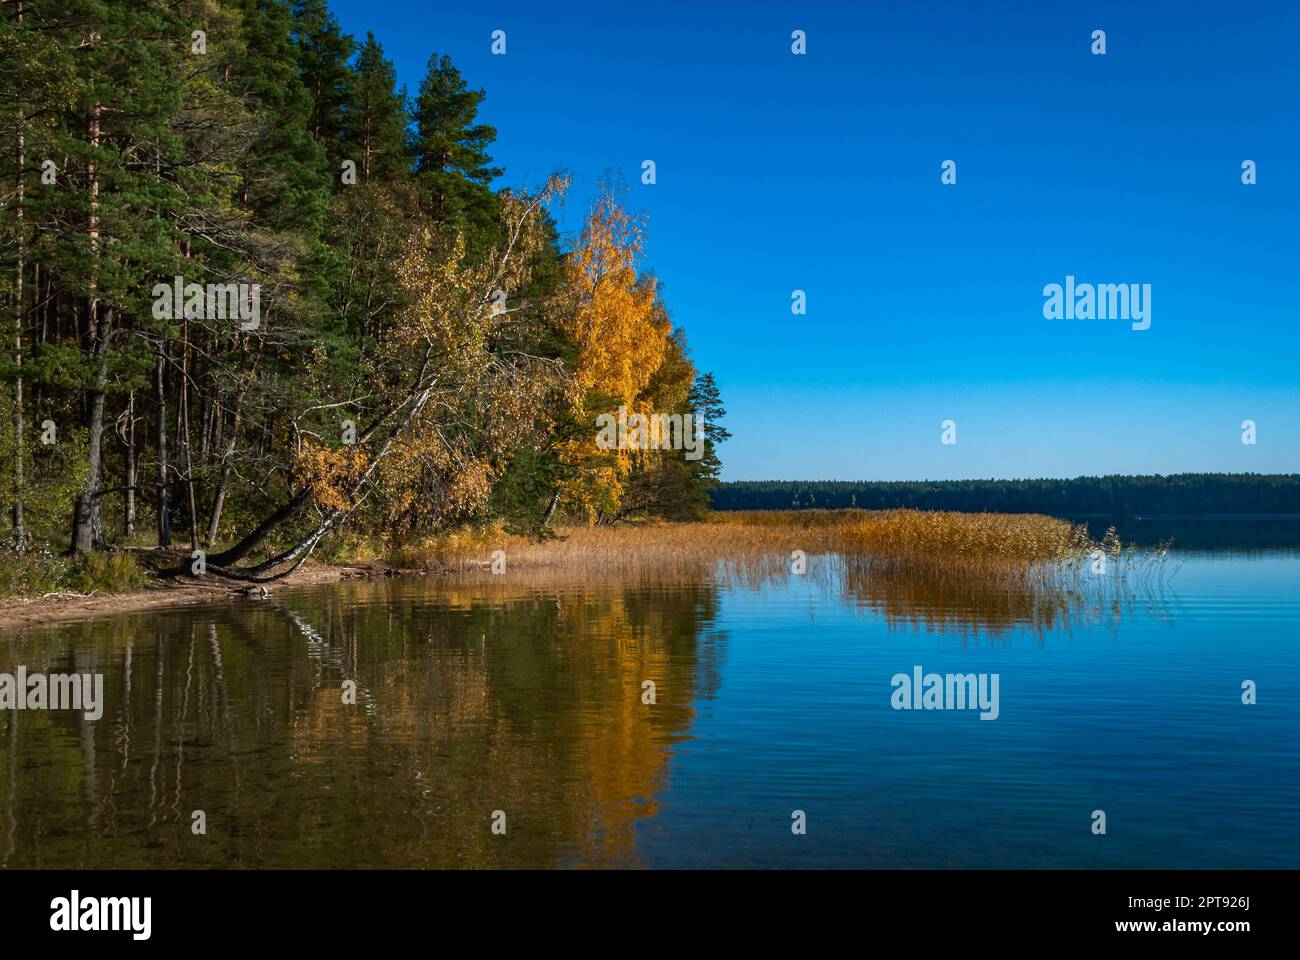 Autumn trees are reflected in the blue surface of Lake Baltieji Lakajai in Labanoras Regional Park, Lithuania. Stock Photo